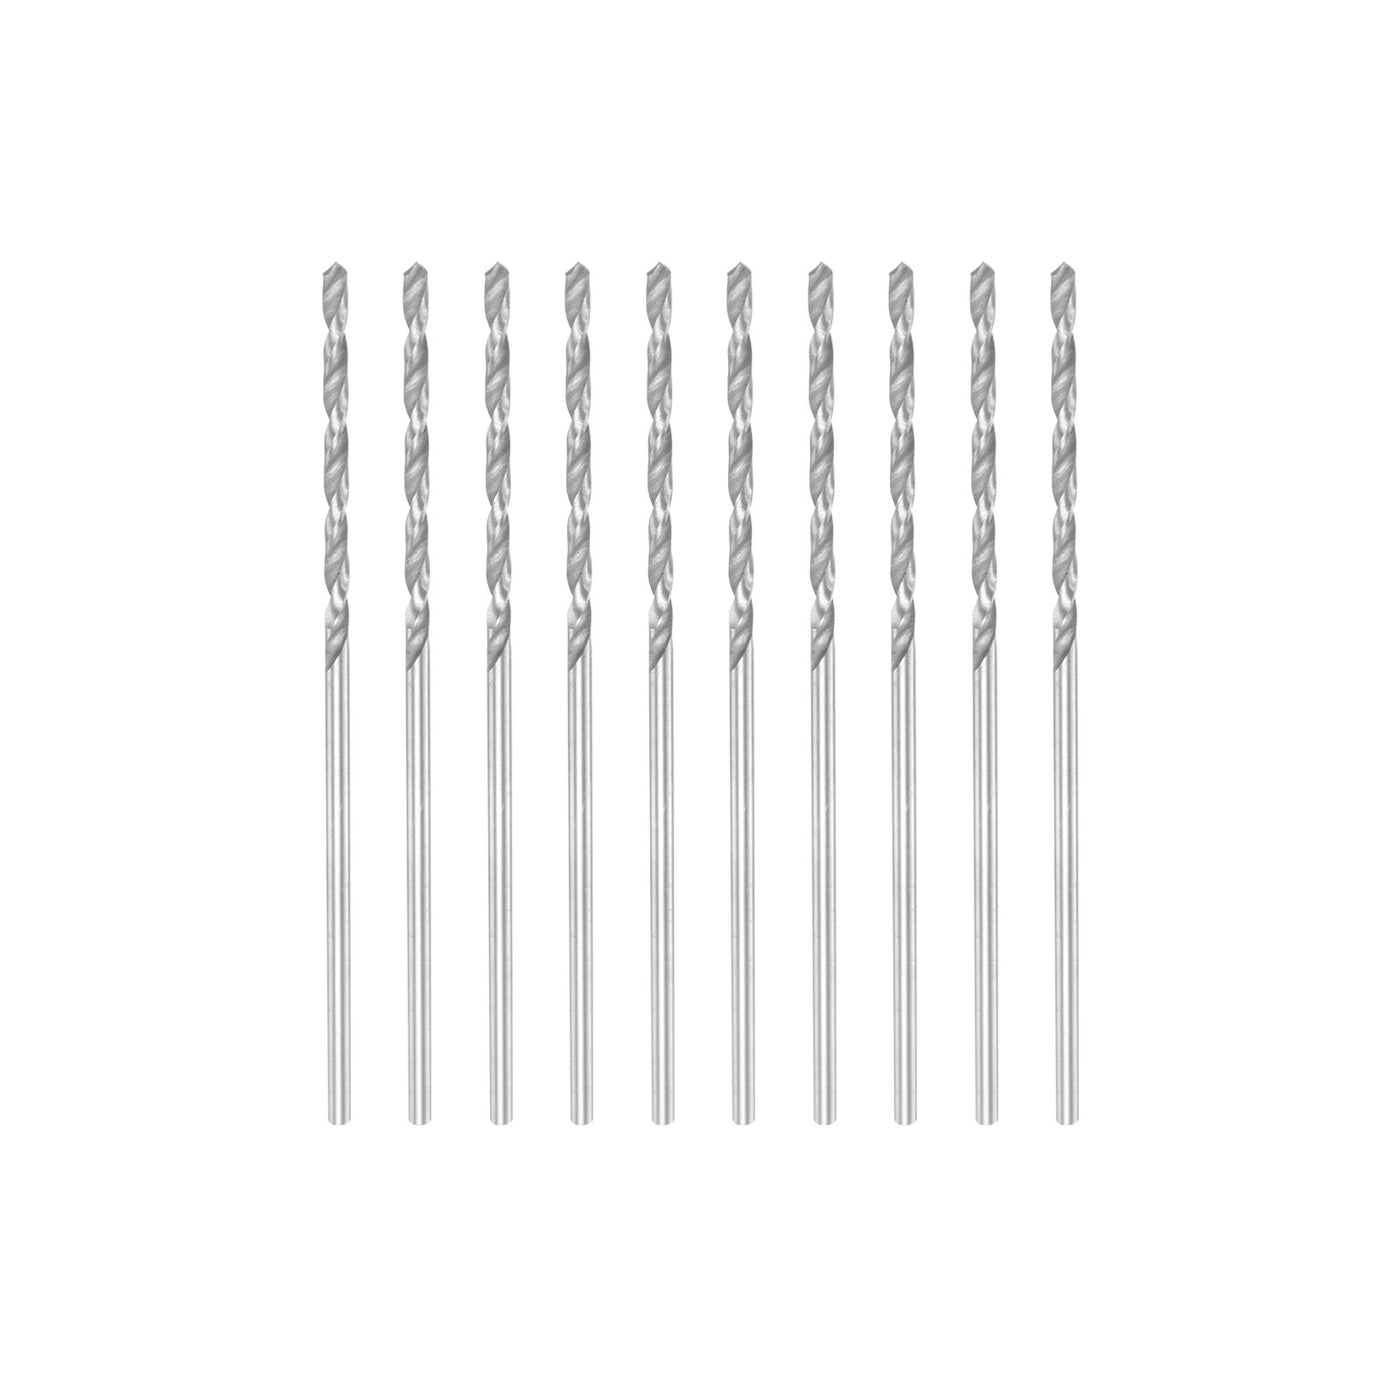 uxcell Uxcell 10 Pcs 1.2mm High Speed Steel Drill Bits, Fully Ground 41mm Length Drill Bit